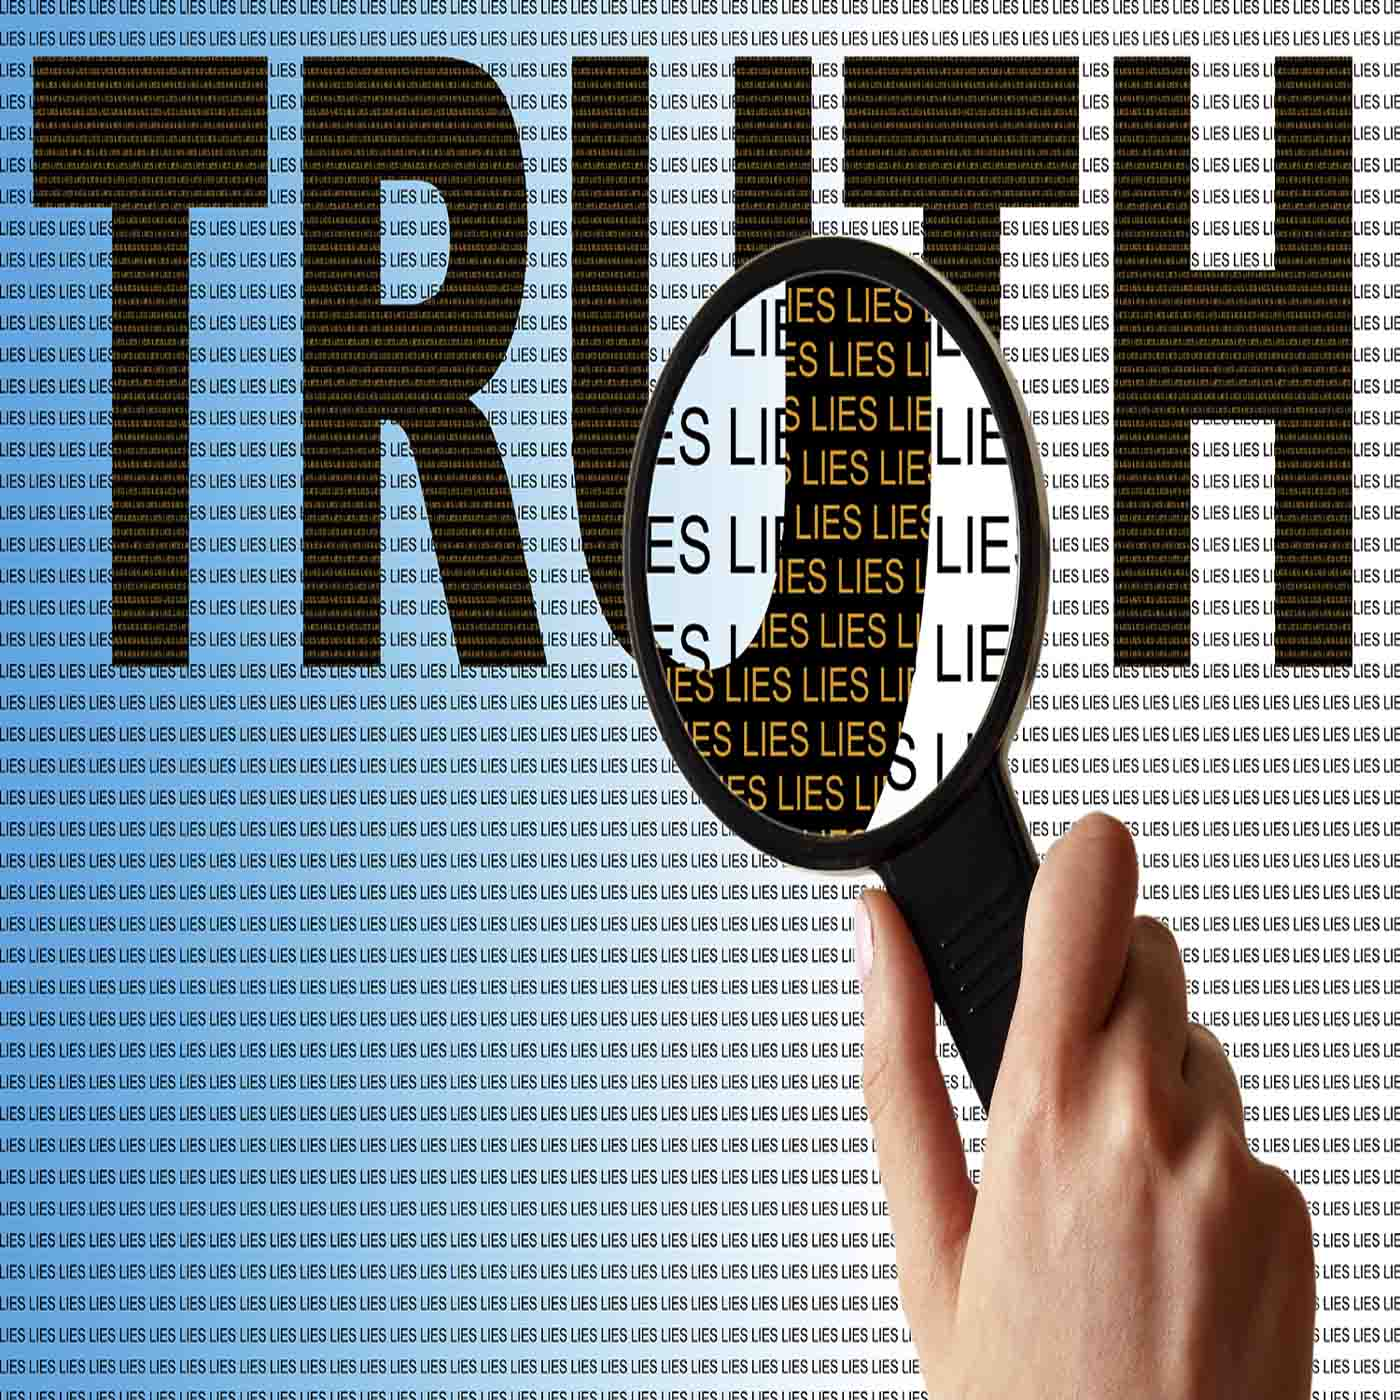 The Opposite of Truth is False